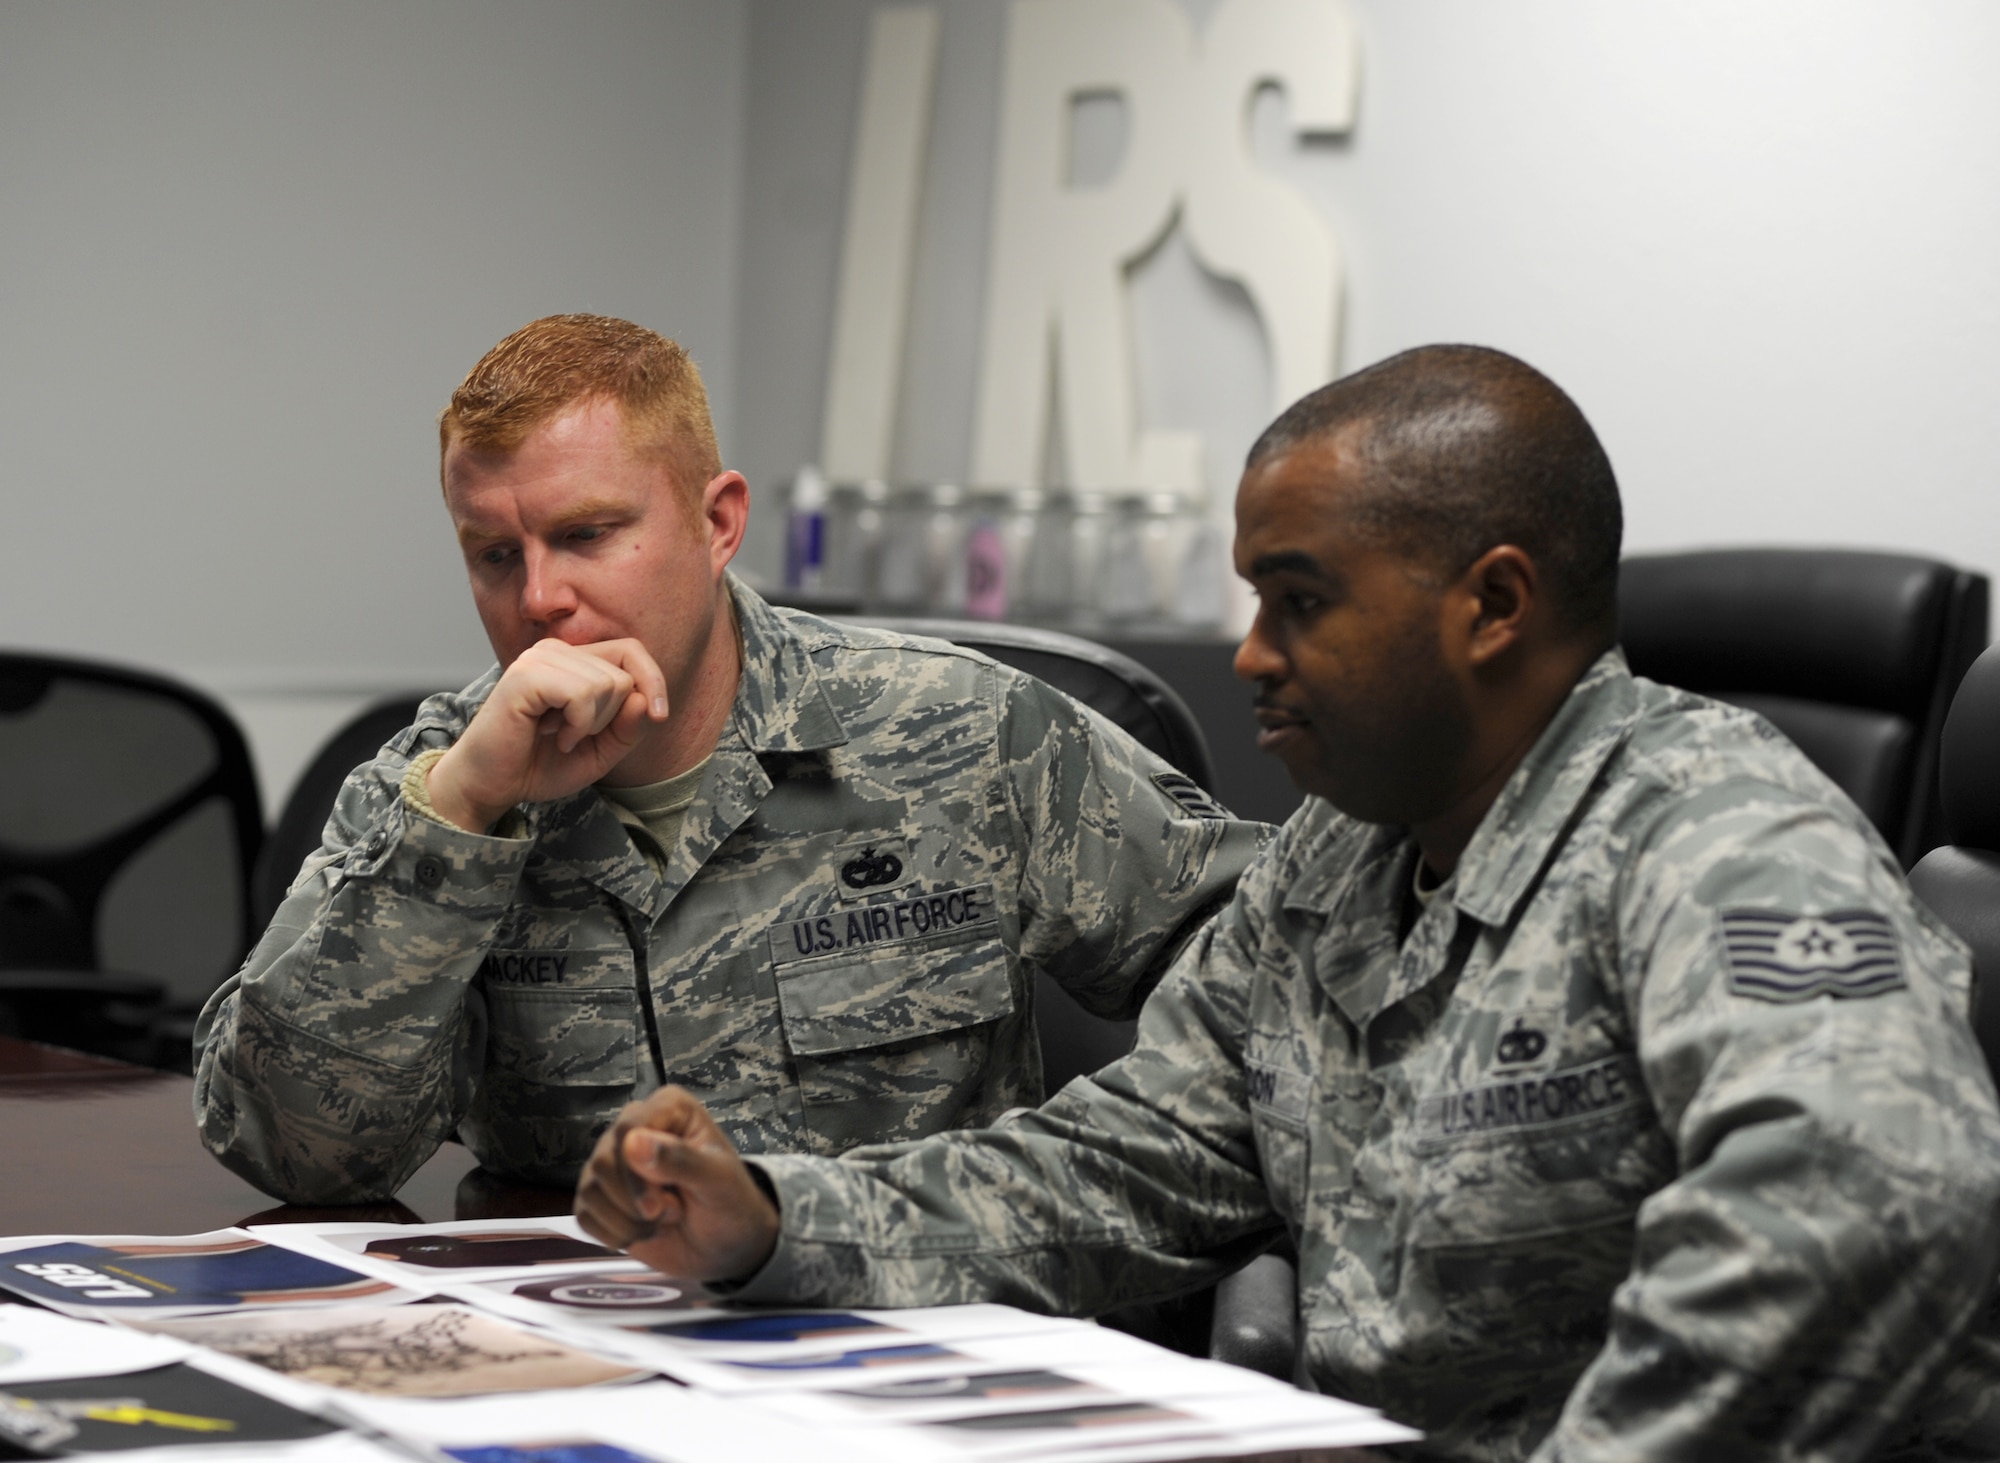 U.S. Air Force Tech Sgt. Patrick Mackey (left), 366th Logistics Readiness Squadron NCO in charge of training and validation operations and Tech Sgt. Greg Gordon, 366 LRS NCO in charge of vehicle operations and control center look at squadron t-shirt designs.  “In support of the new [Air Force Instruction] we are coming up with a new squadron t-shirt for Fridays. We are having Airmen throughout our squadron make designs where we will then vote which will be our new T-shirt to boost squadron morale,” said Mackey. The revision to Air Force Instruction 36-2903 paragraph 6.5.2.1. states, “Squadron commanders may authorize Airmen to wear a standardized color undershirt on Friday (only one color per squadron; individual purchase only, not unit-funded).”  (U.S. Air Force photo by Airman 1st Class Brittany A. Chase/Released)